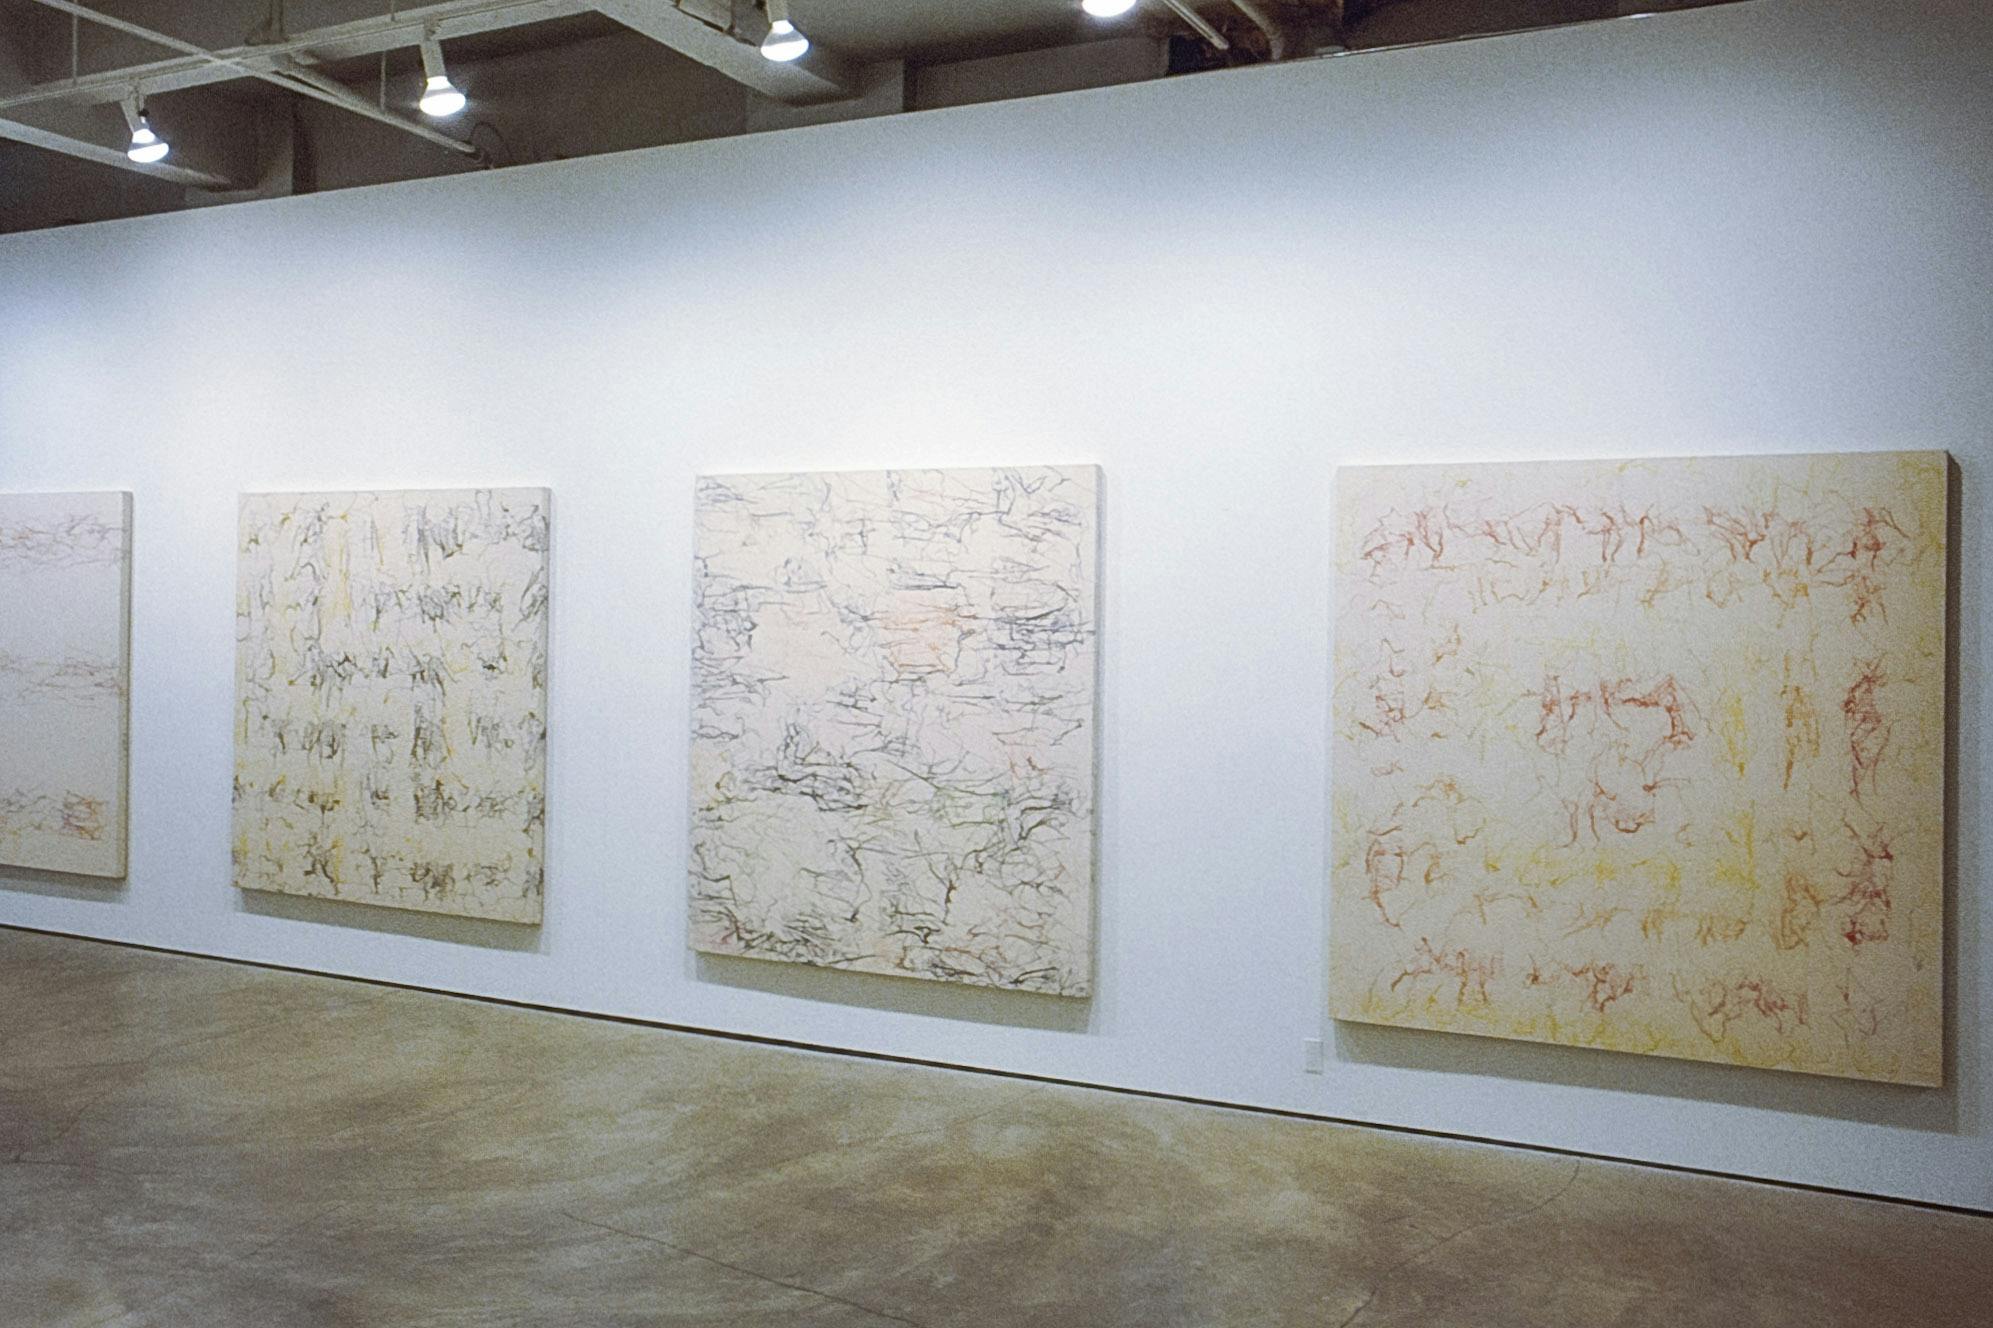 Four large drawings are installed on the gallery wall. On their identically-sized rectangle canvases, some abstract line drawings are made in various colours.  